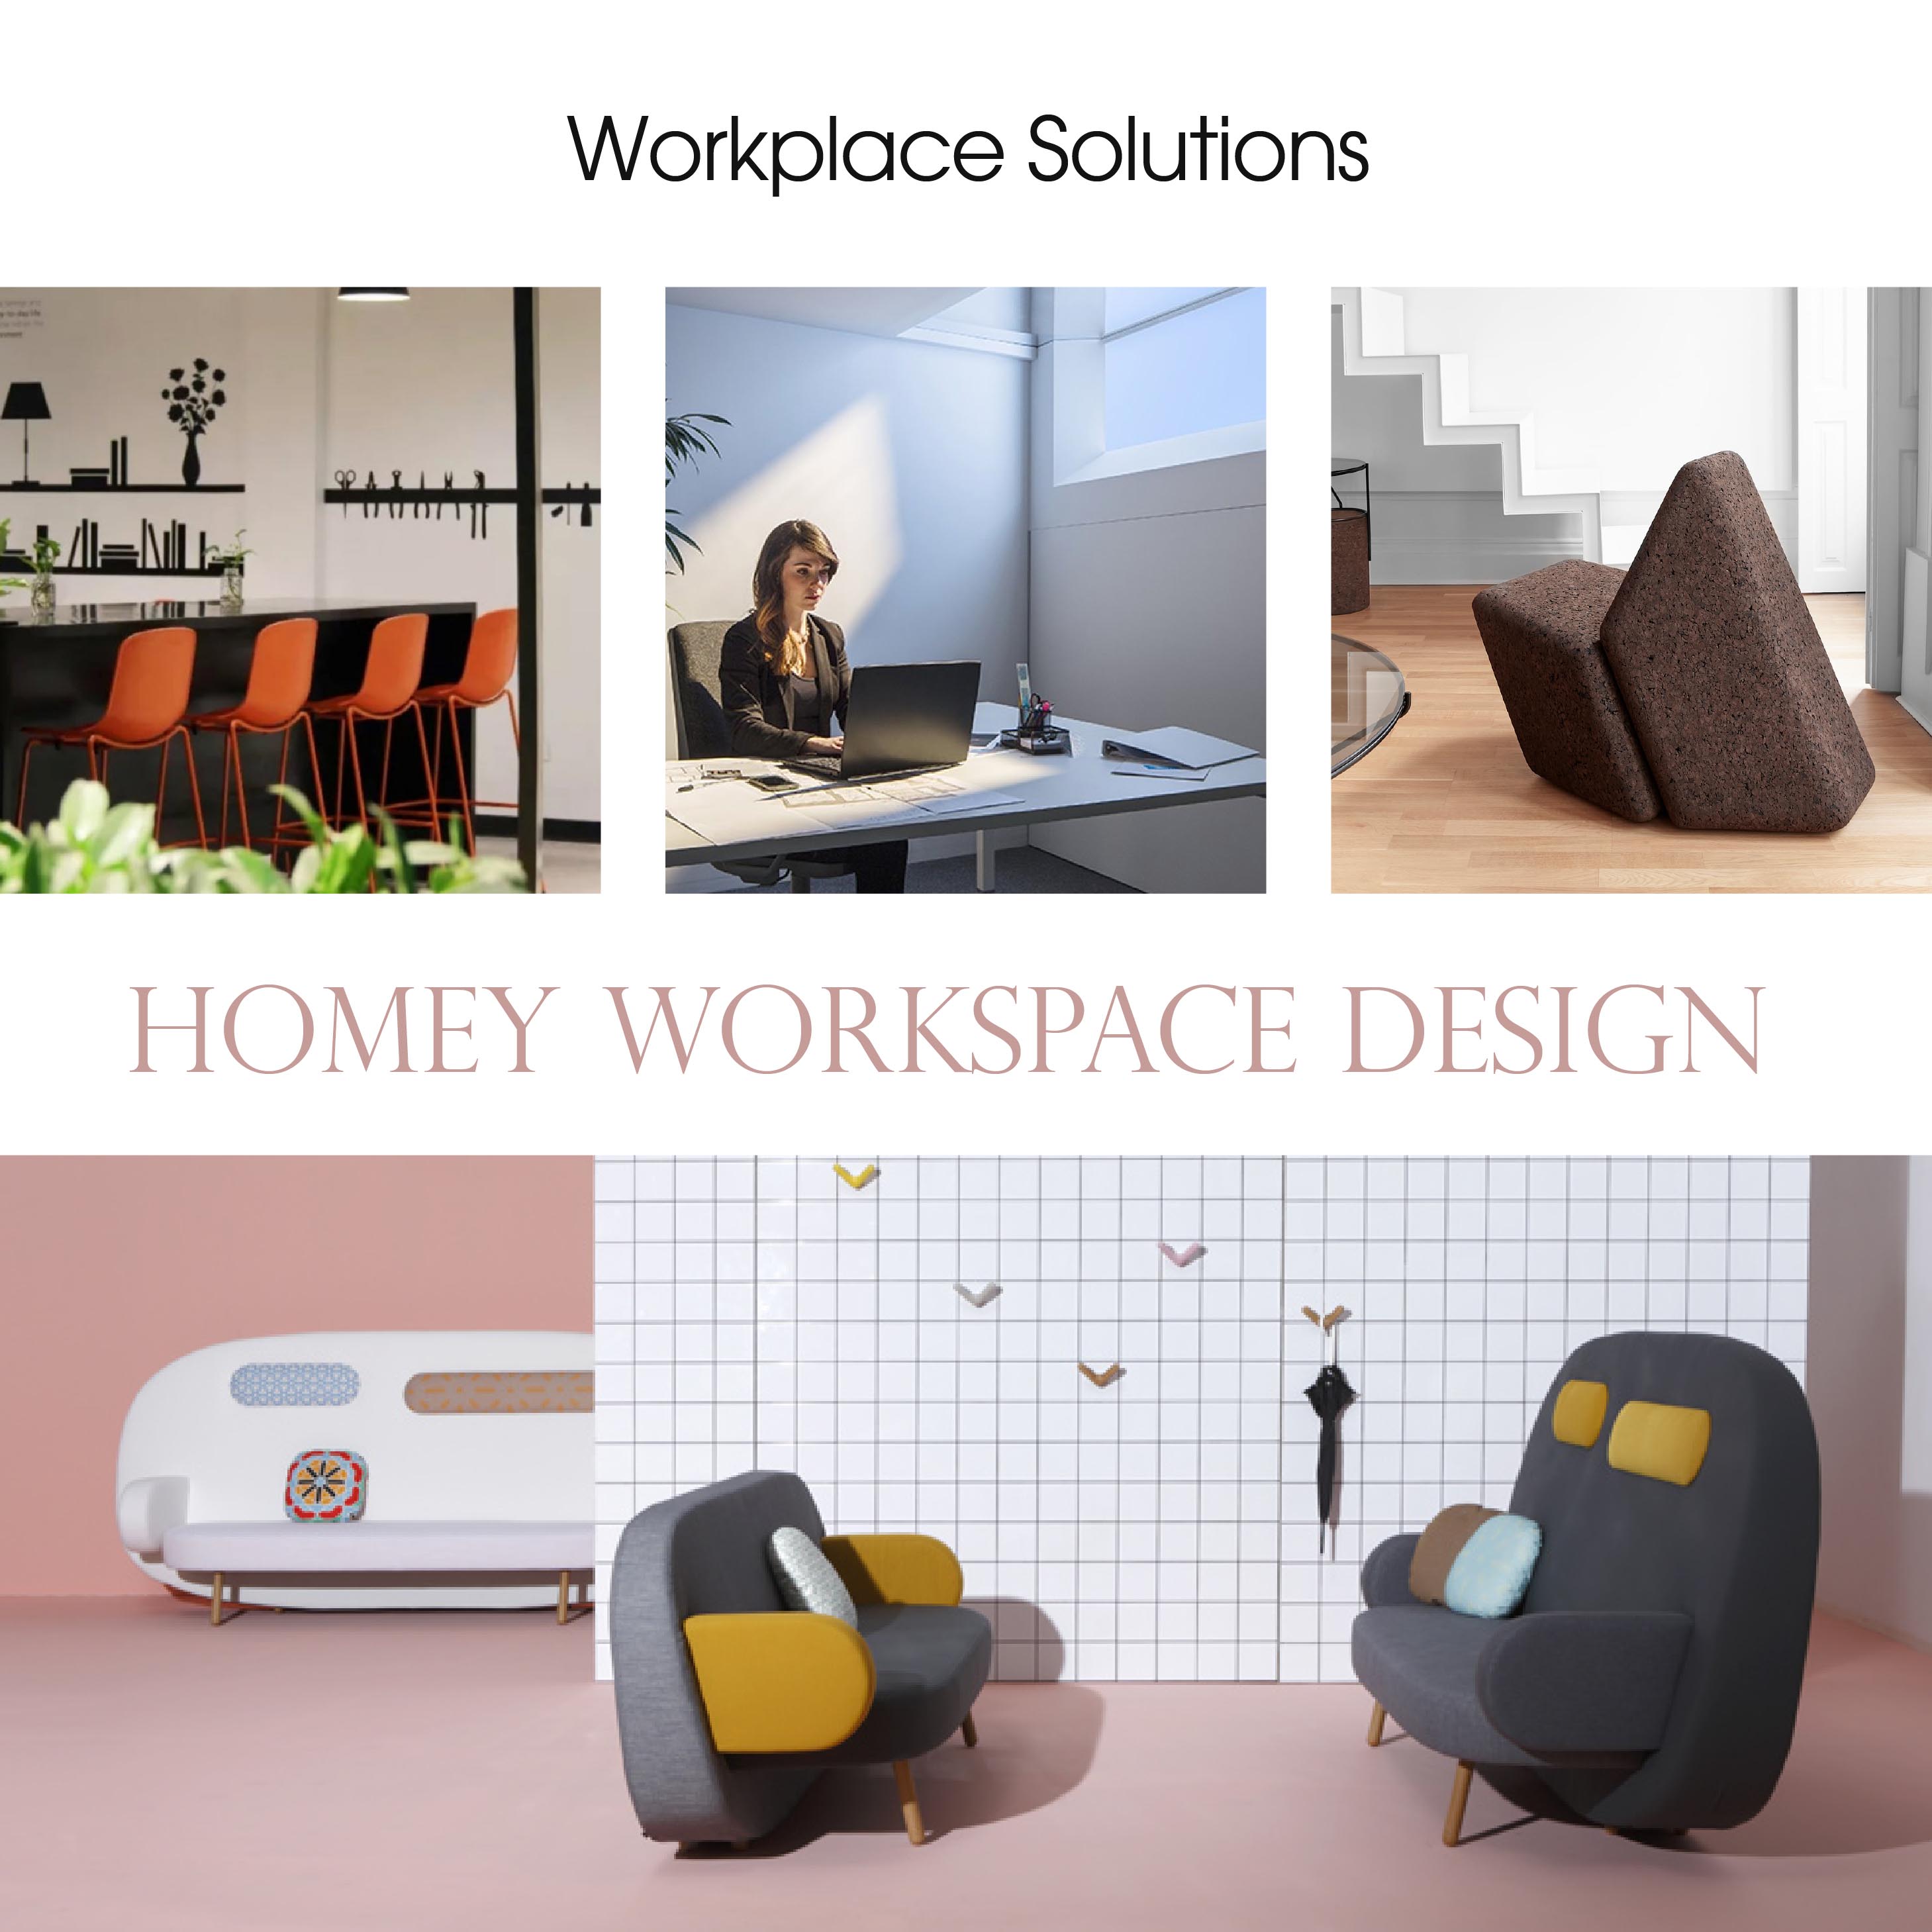 COLOURLIVING | WORKPLACE SOLUTIONS | HOMEY WORKSPACE DESIGN